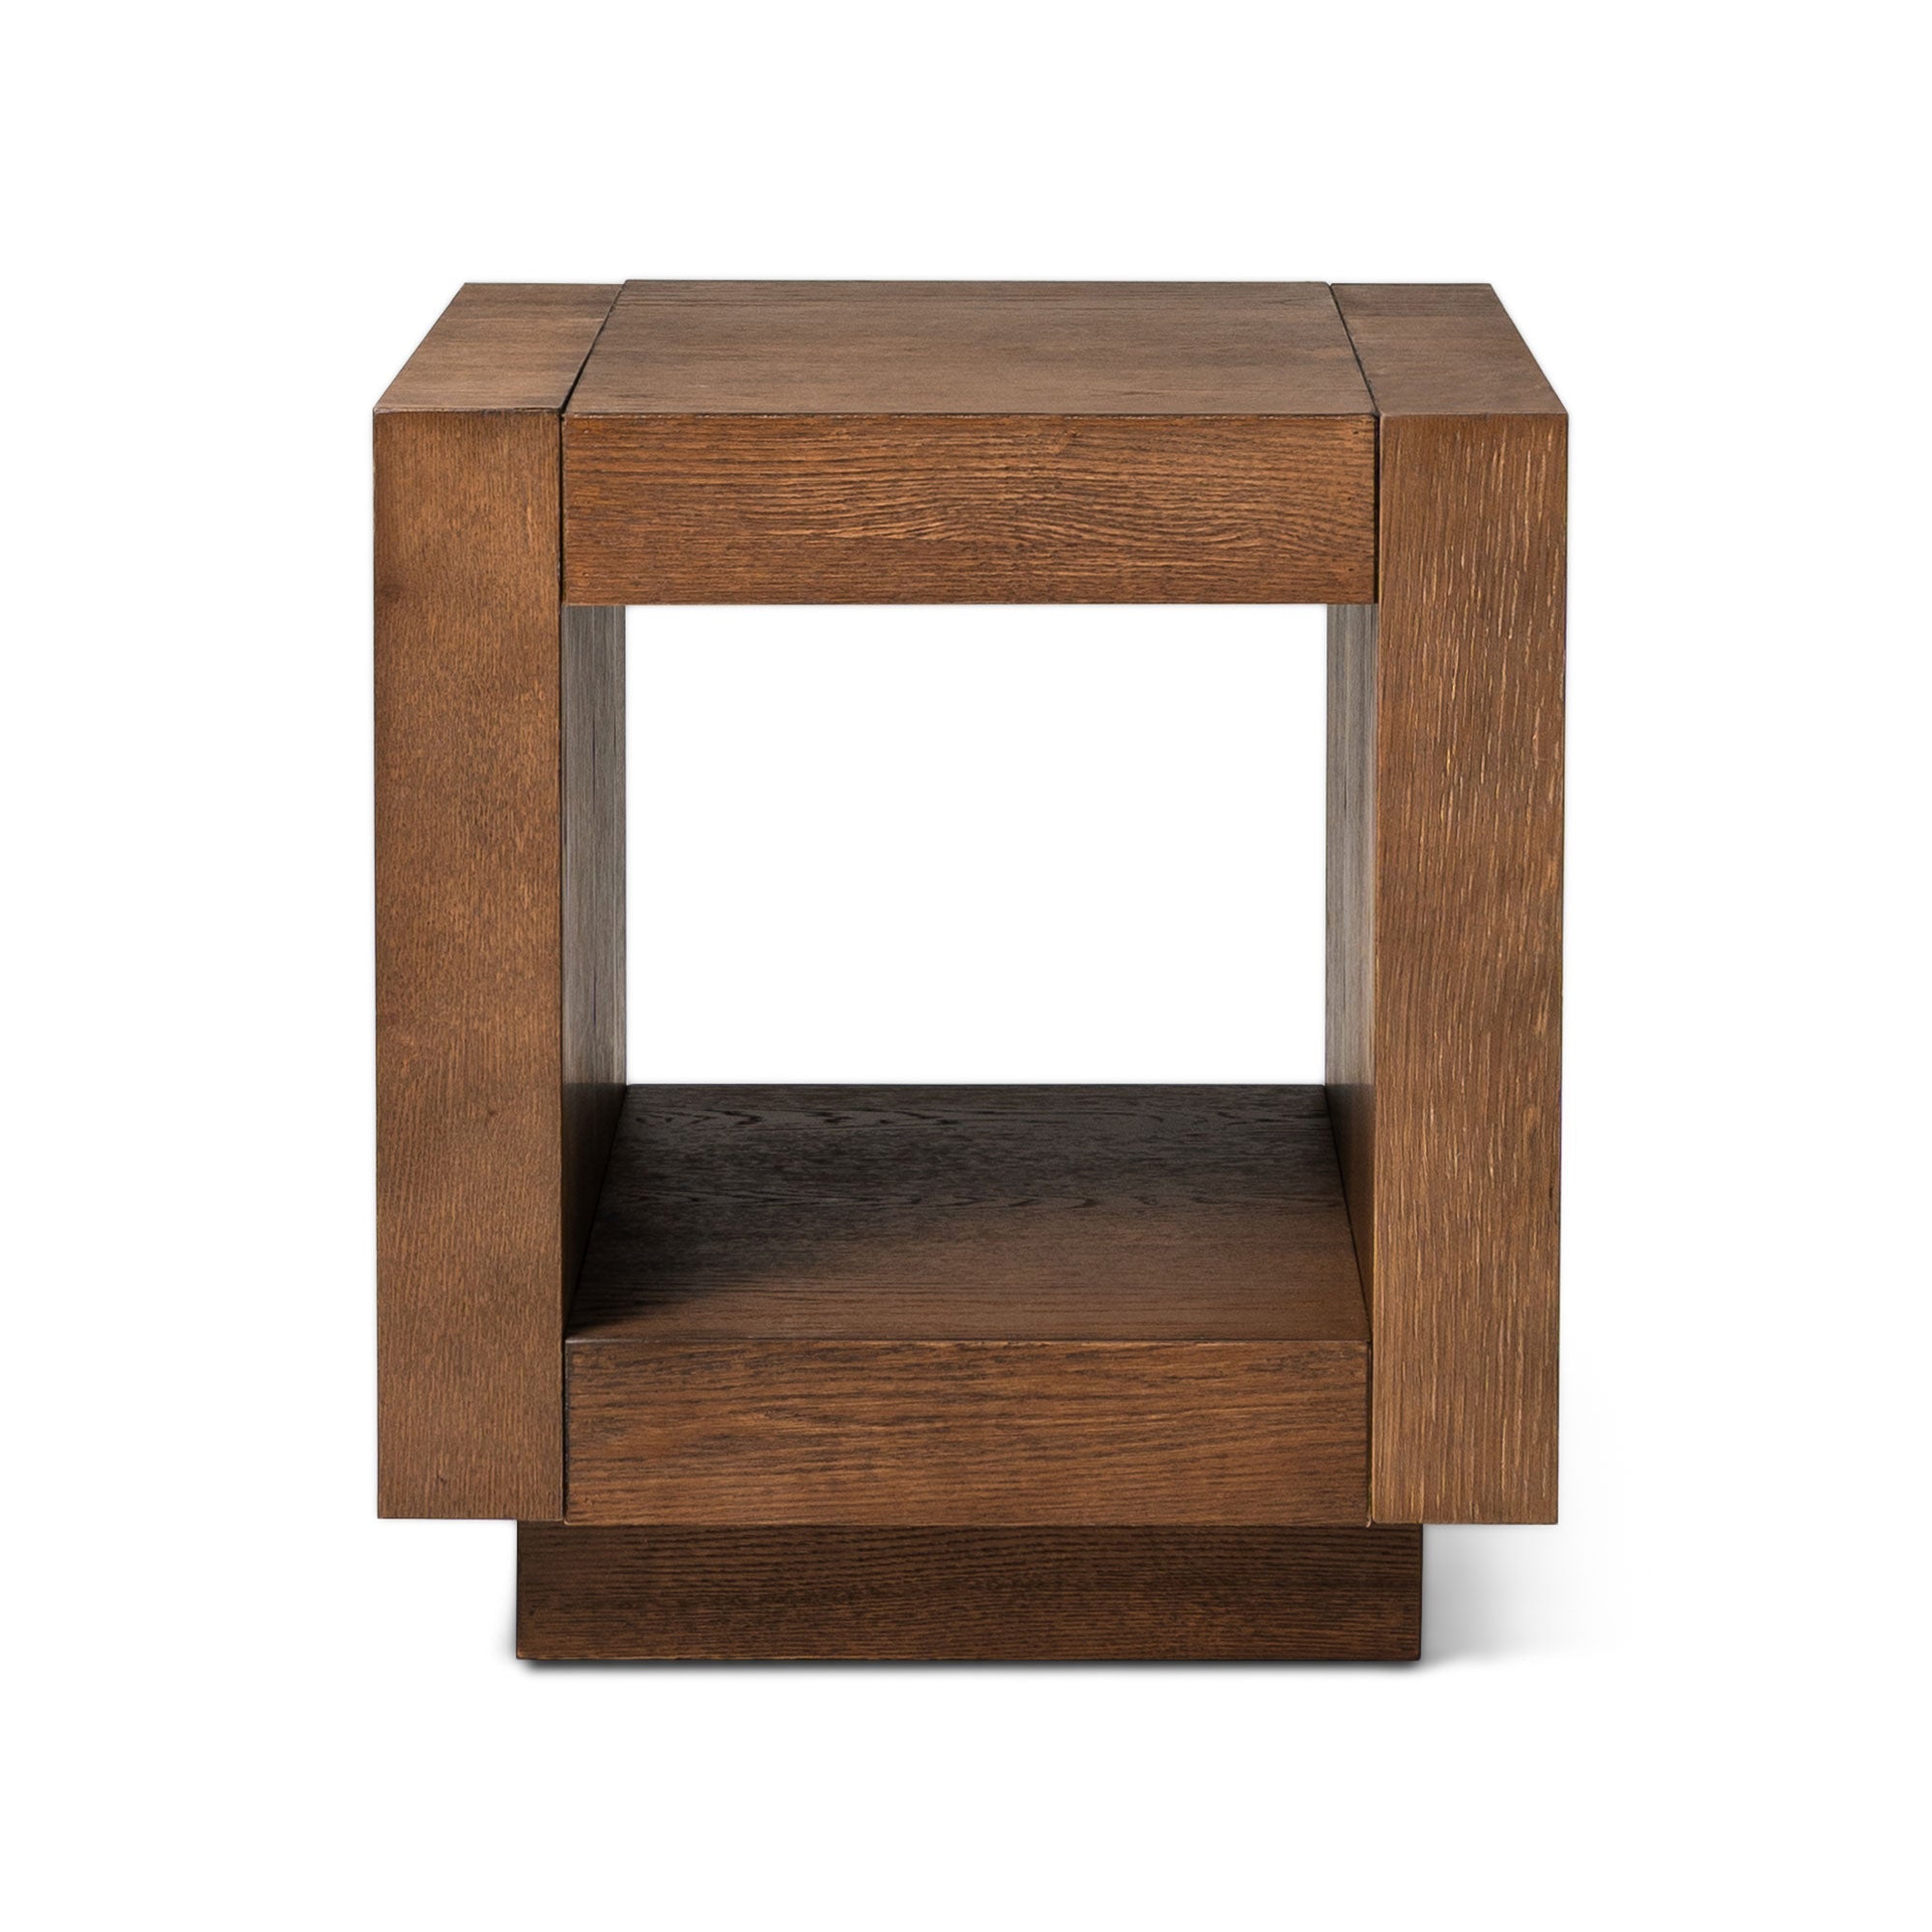 Artemis Contemporary Wooden Side Table in Refined Brown Finish